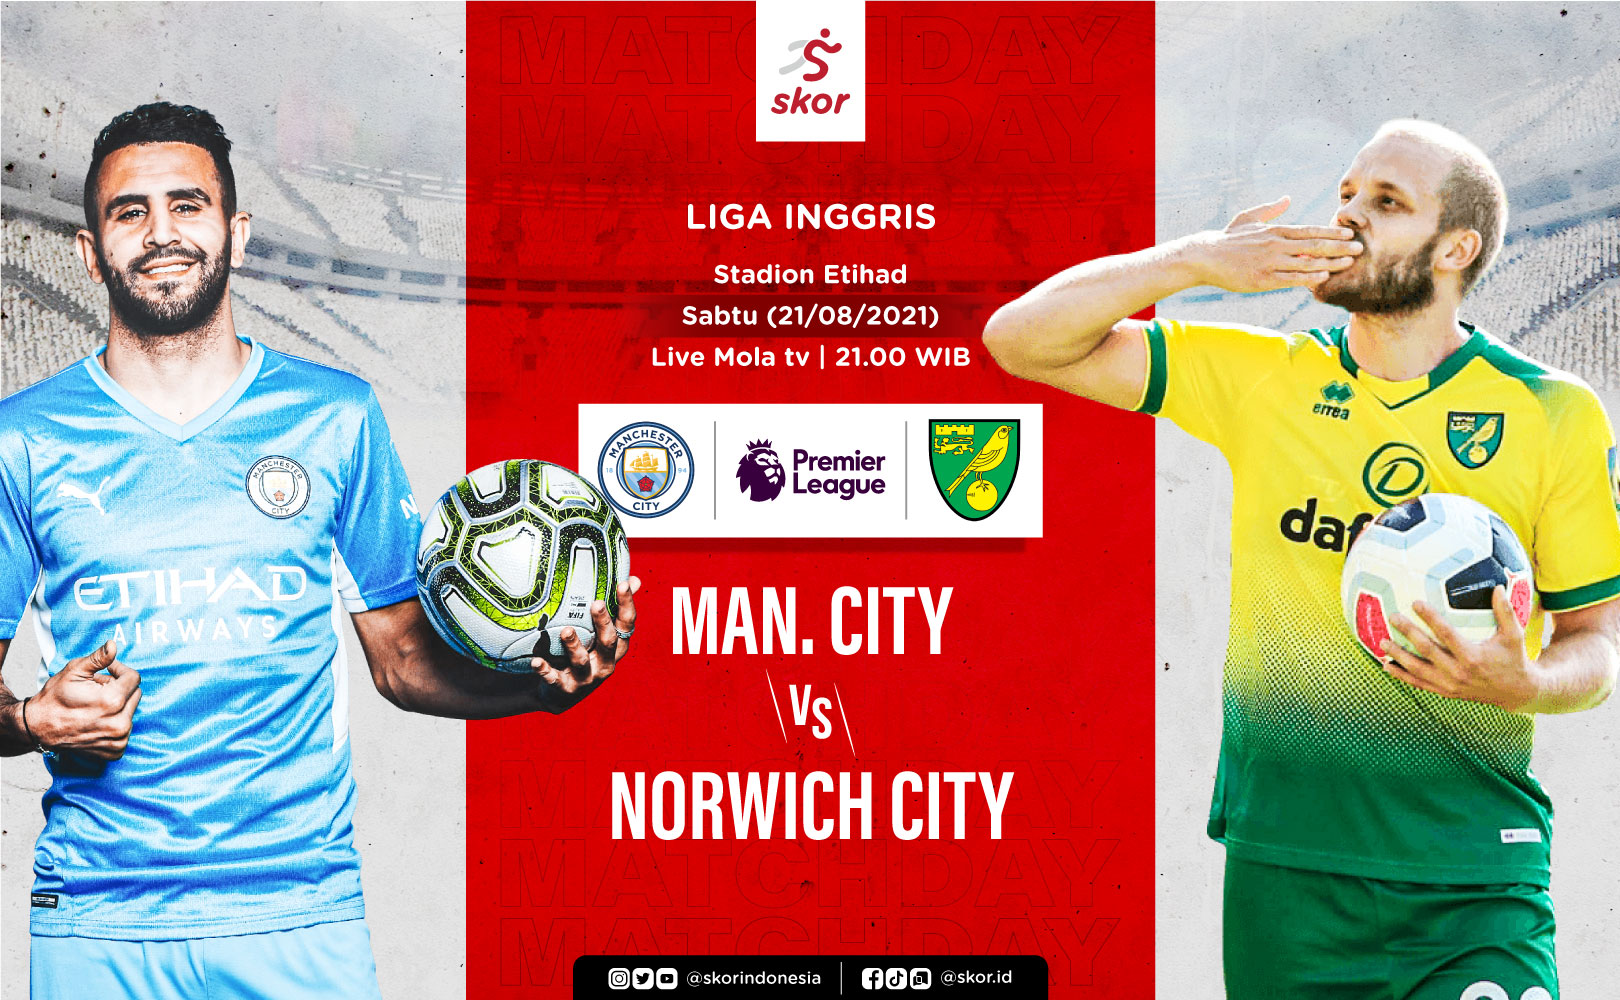 Link Live Streaming Liga Inggris: Manchester City vs Norwich City